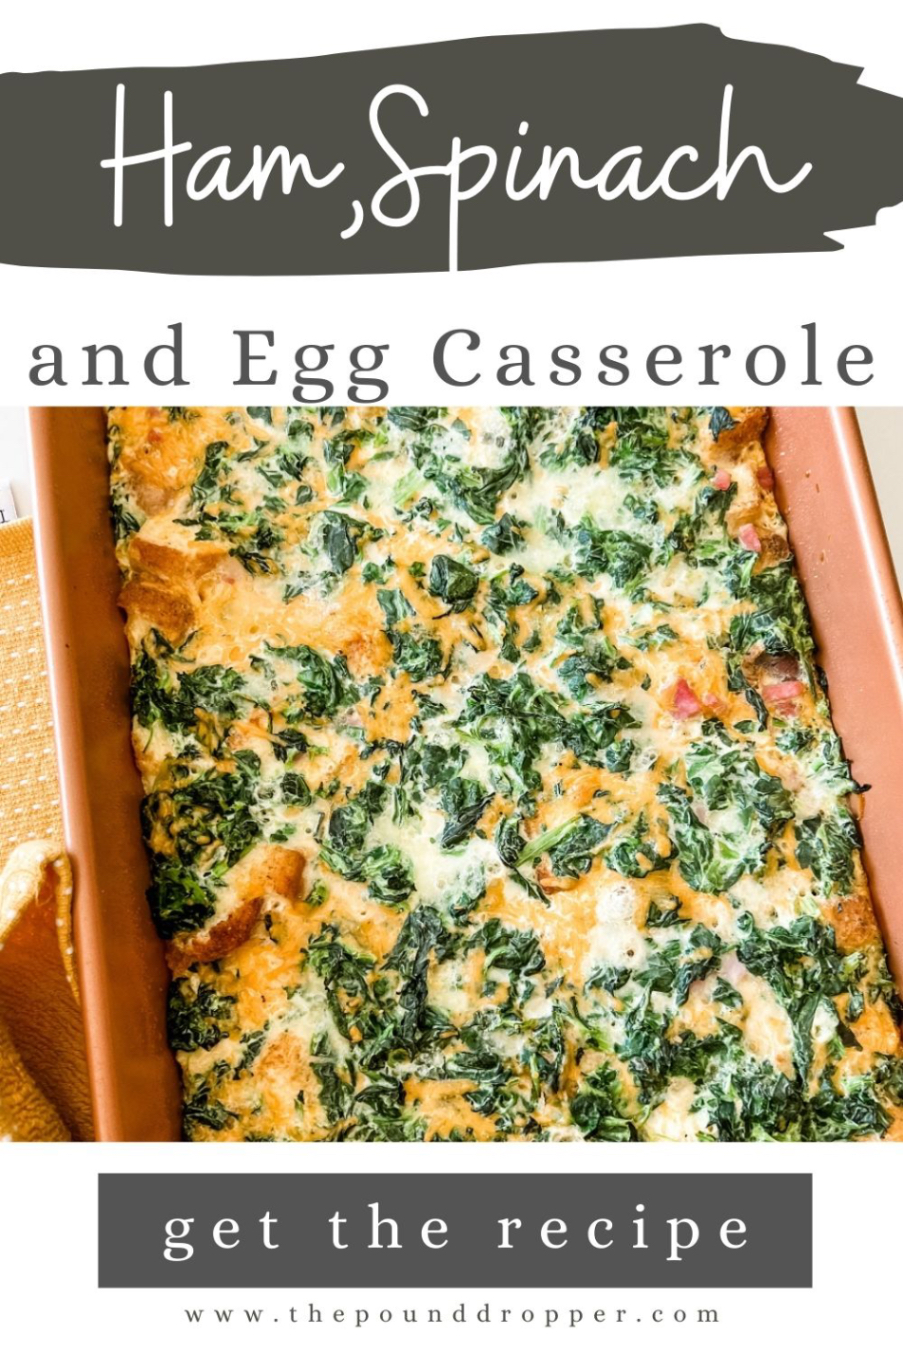 This Ham, Spinach, and Egg Casserole is the BEST of the BEST - layered with Italian style croutons, and packed with diced ham, spinach, and cheese! A simple yet delicious Breakfast Casserole recipe that can be prepared the night before! via @pounddropper